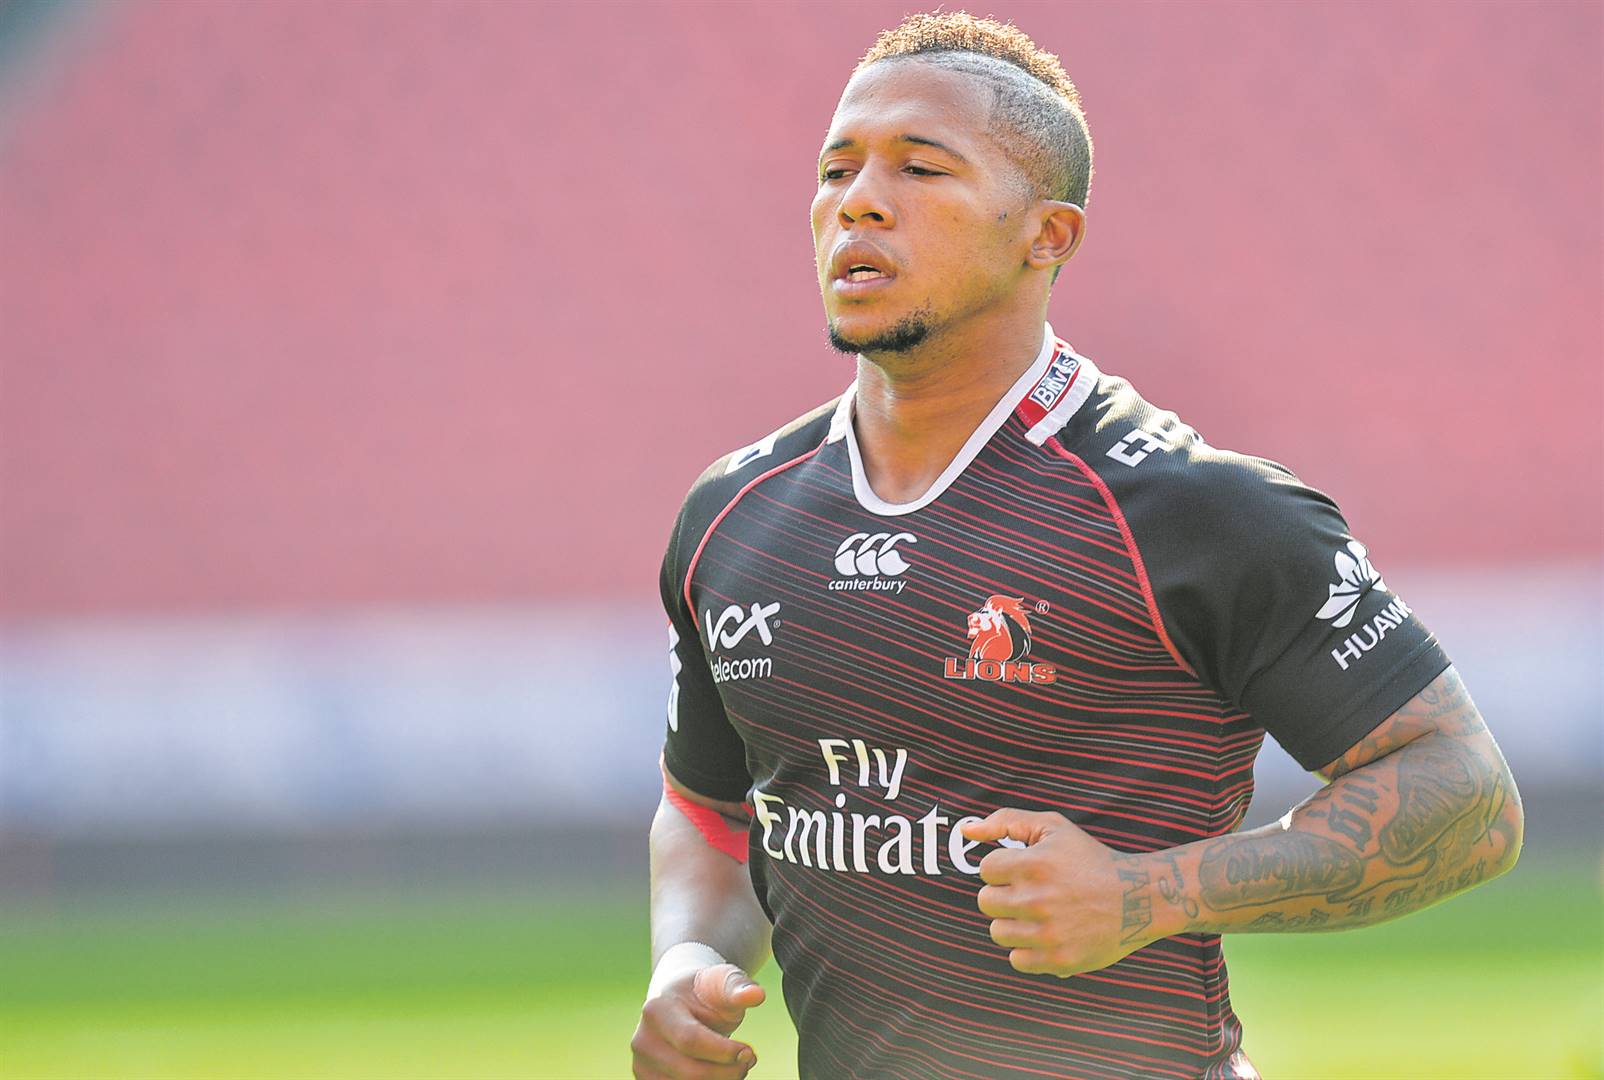 Springbok, Elton Jantjies was arrested on a charge of malicious damage to airline property after arriving in Johannesburg on a flight from Dubai yesterday morning, May 15.